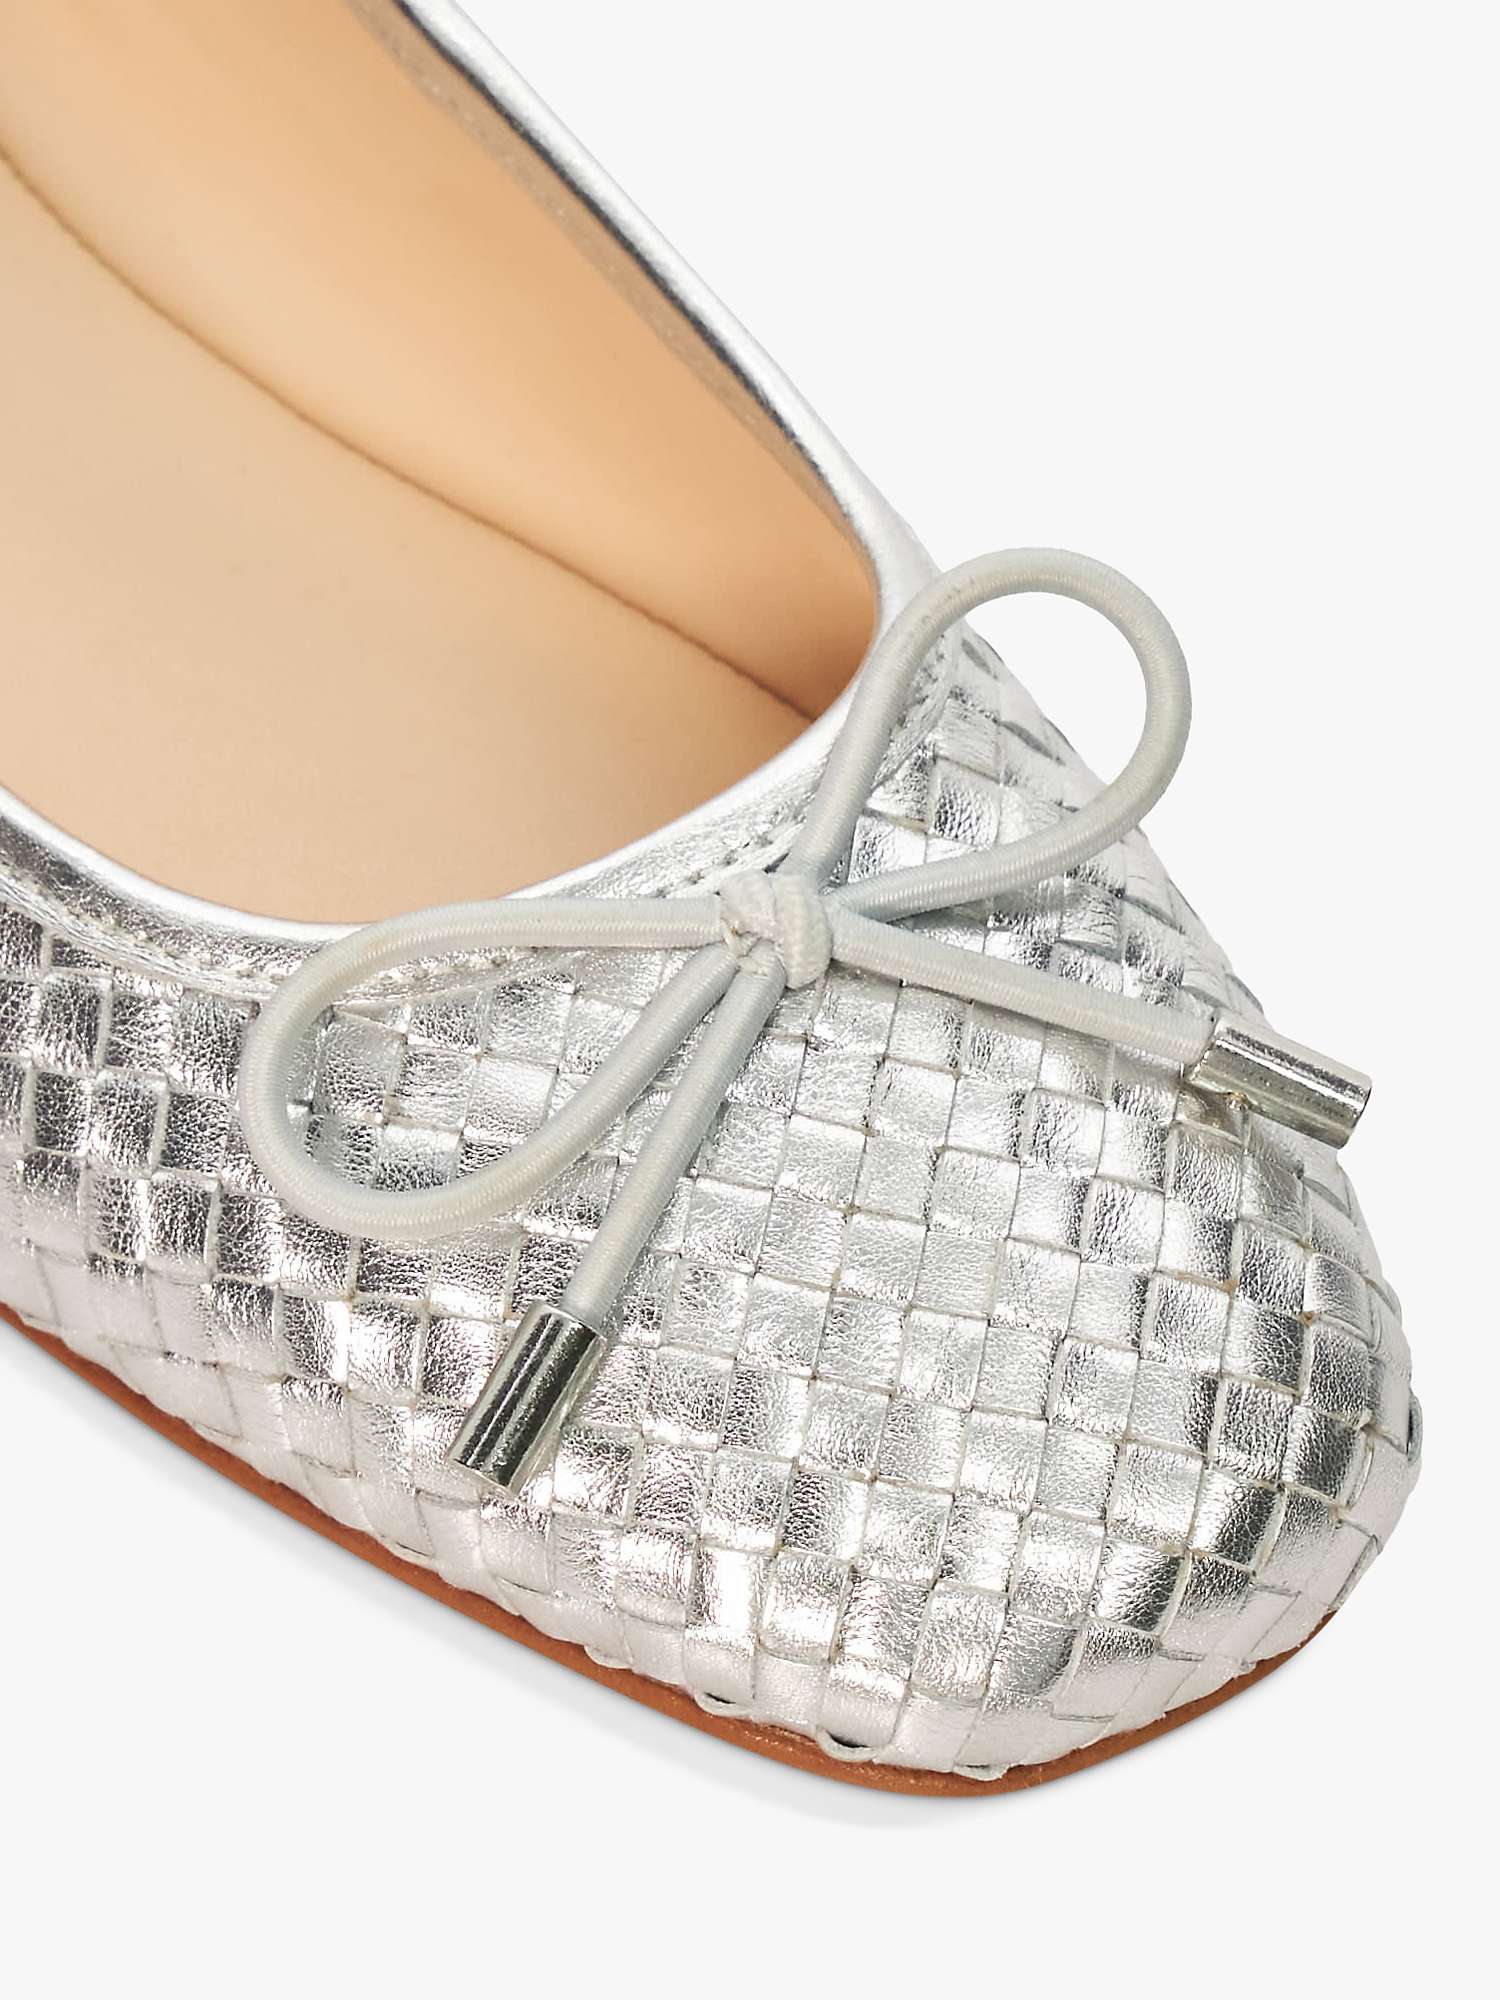 Buy Dune Heights Woven Leather Ballet Pumps Online at johnlewis.com